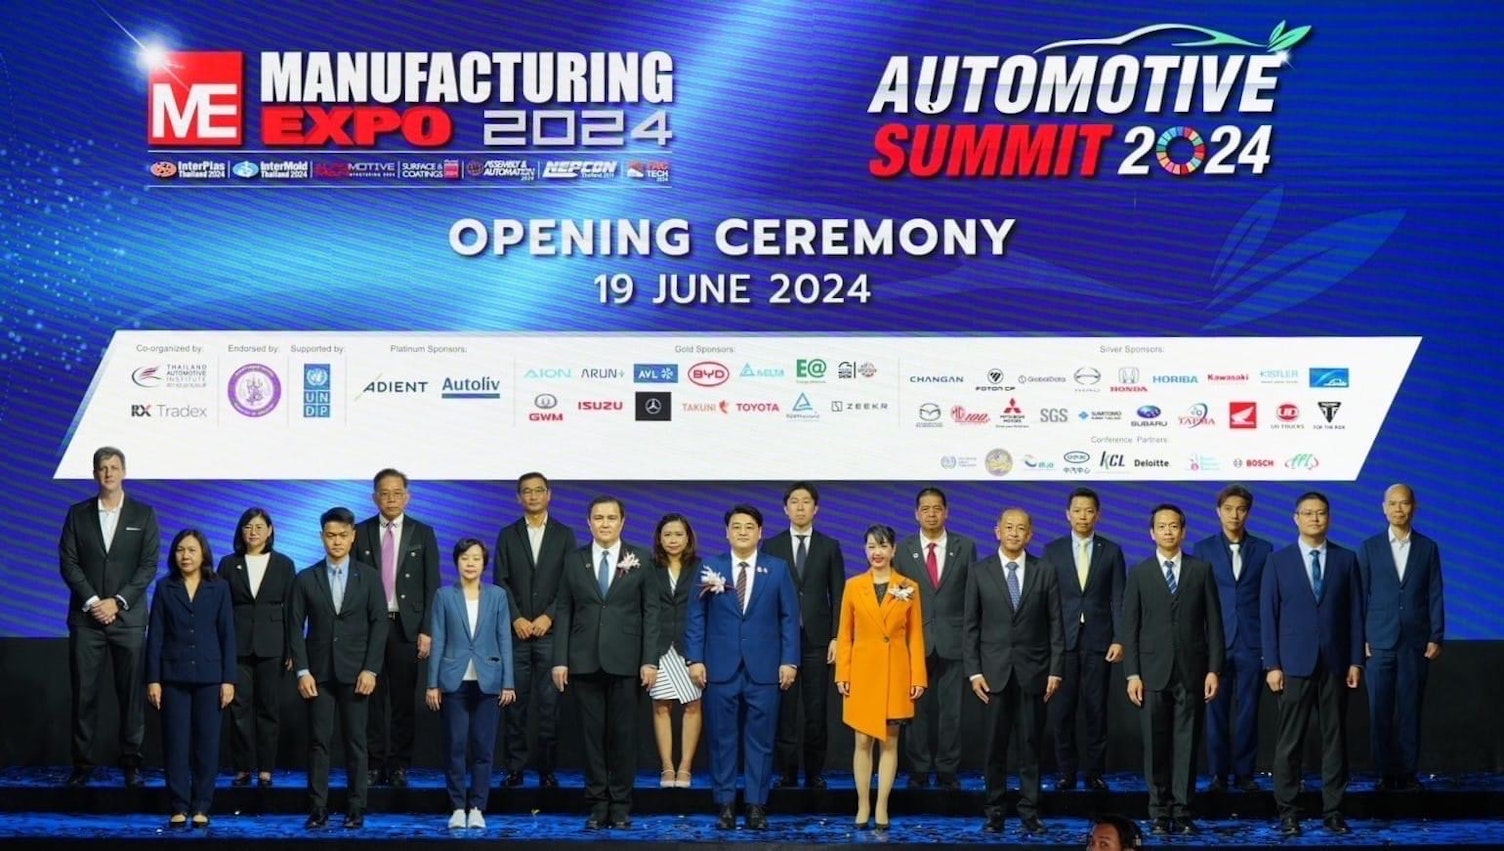 sgs is an honorable lecturer at Automotive Summit 2024